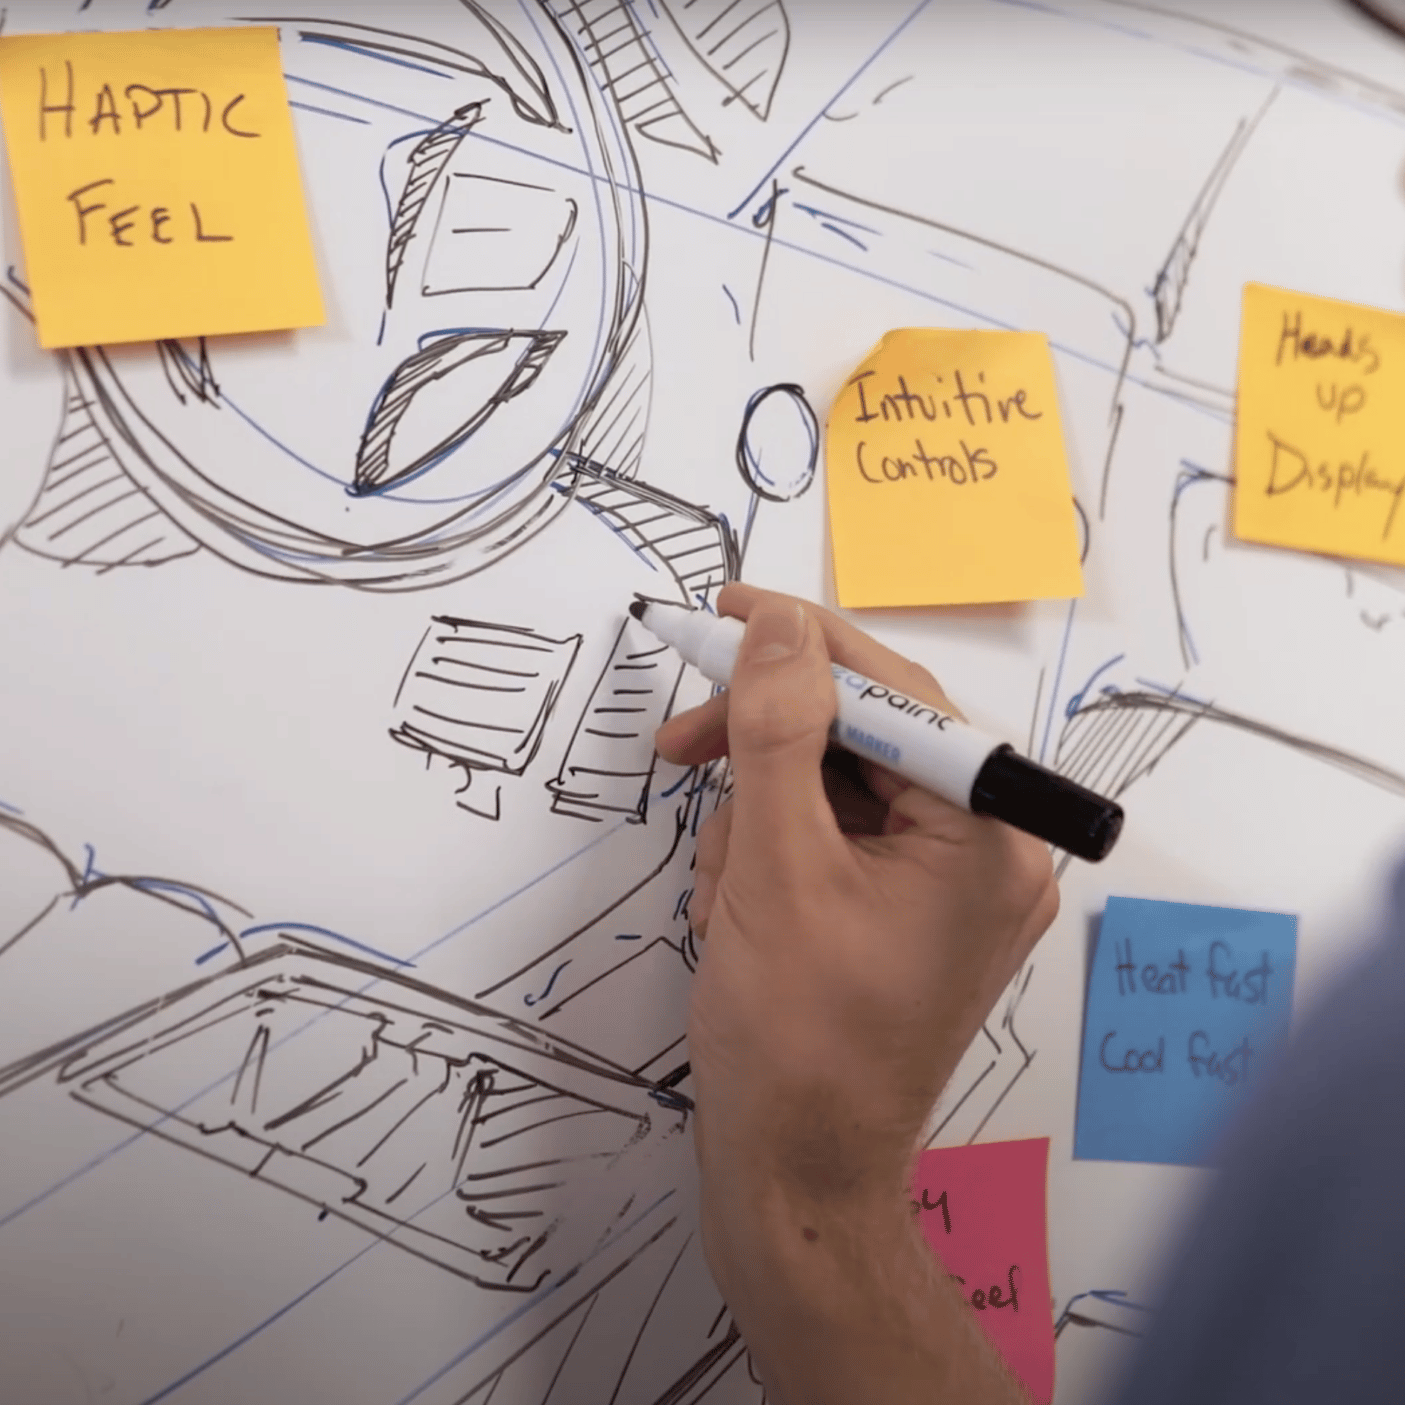 An industrial designer brainstorming on a whiteboard